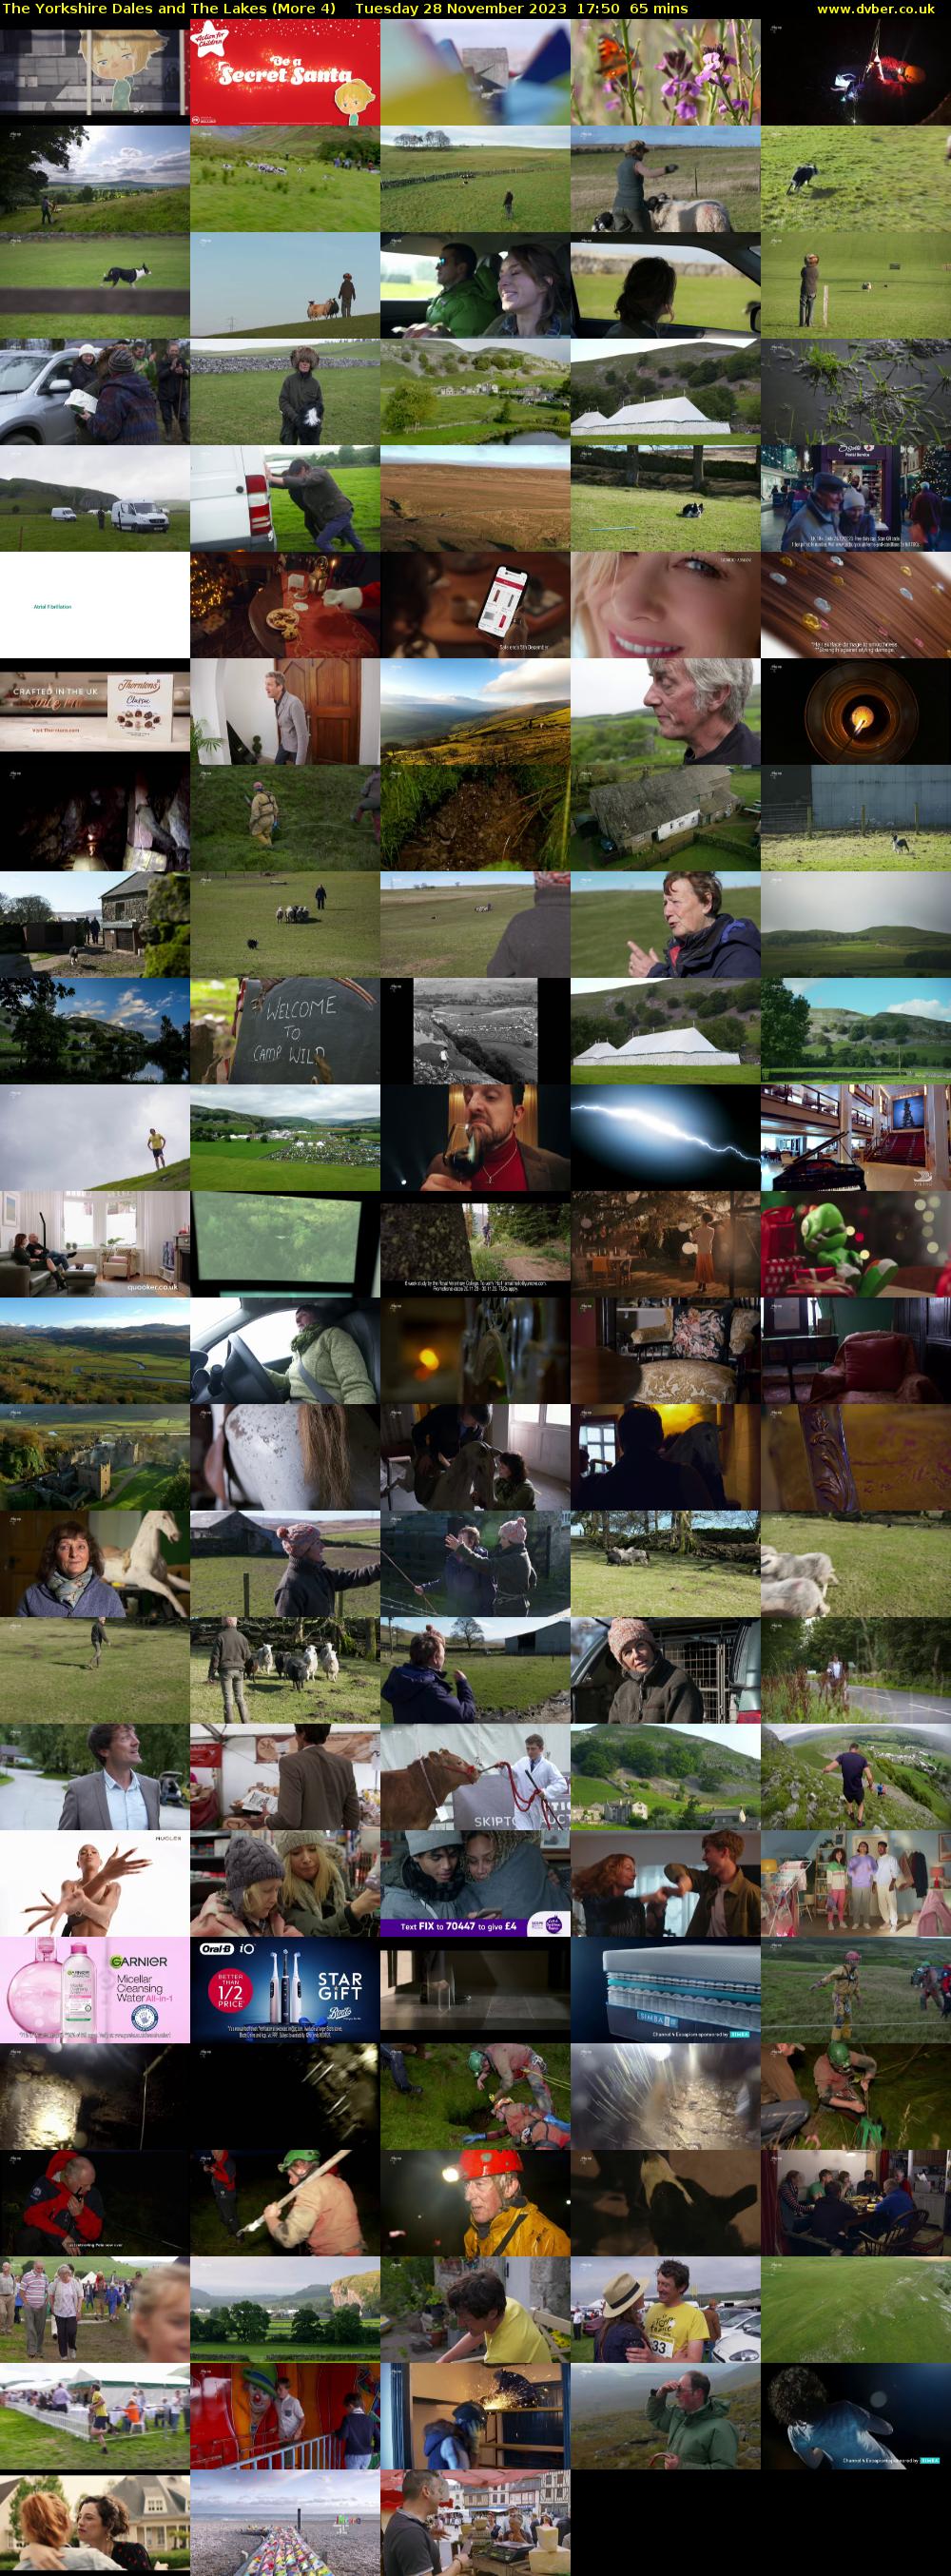 The Yorkshire Dales and The Lakes (More 4) Tuesday 28 November 2023 17:50 - 18:55